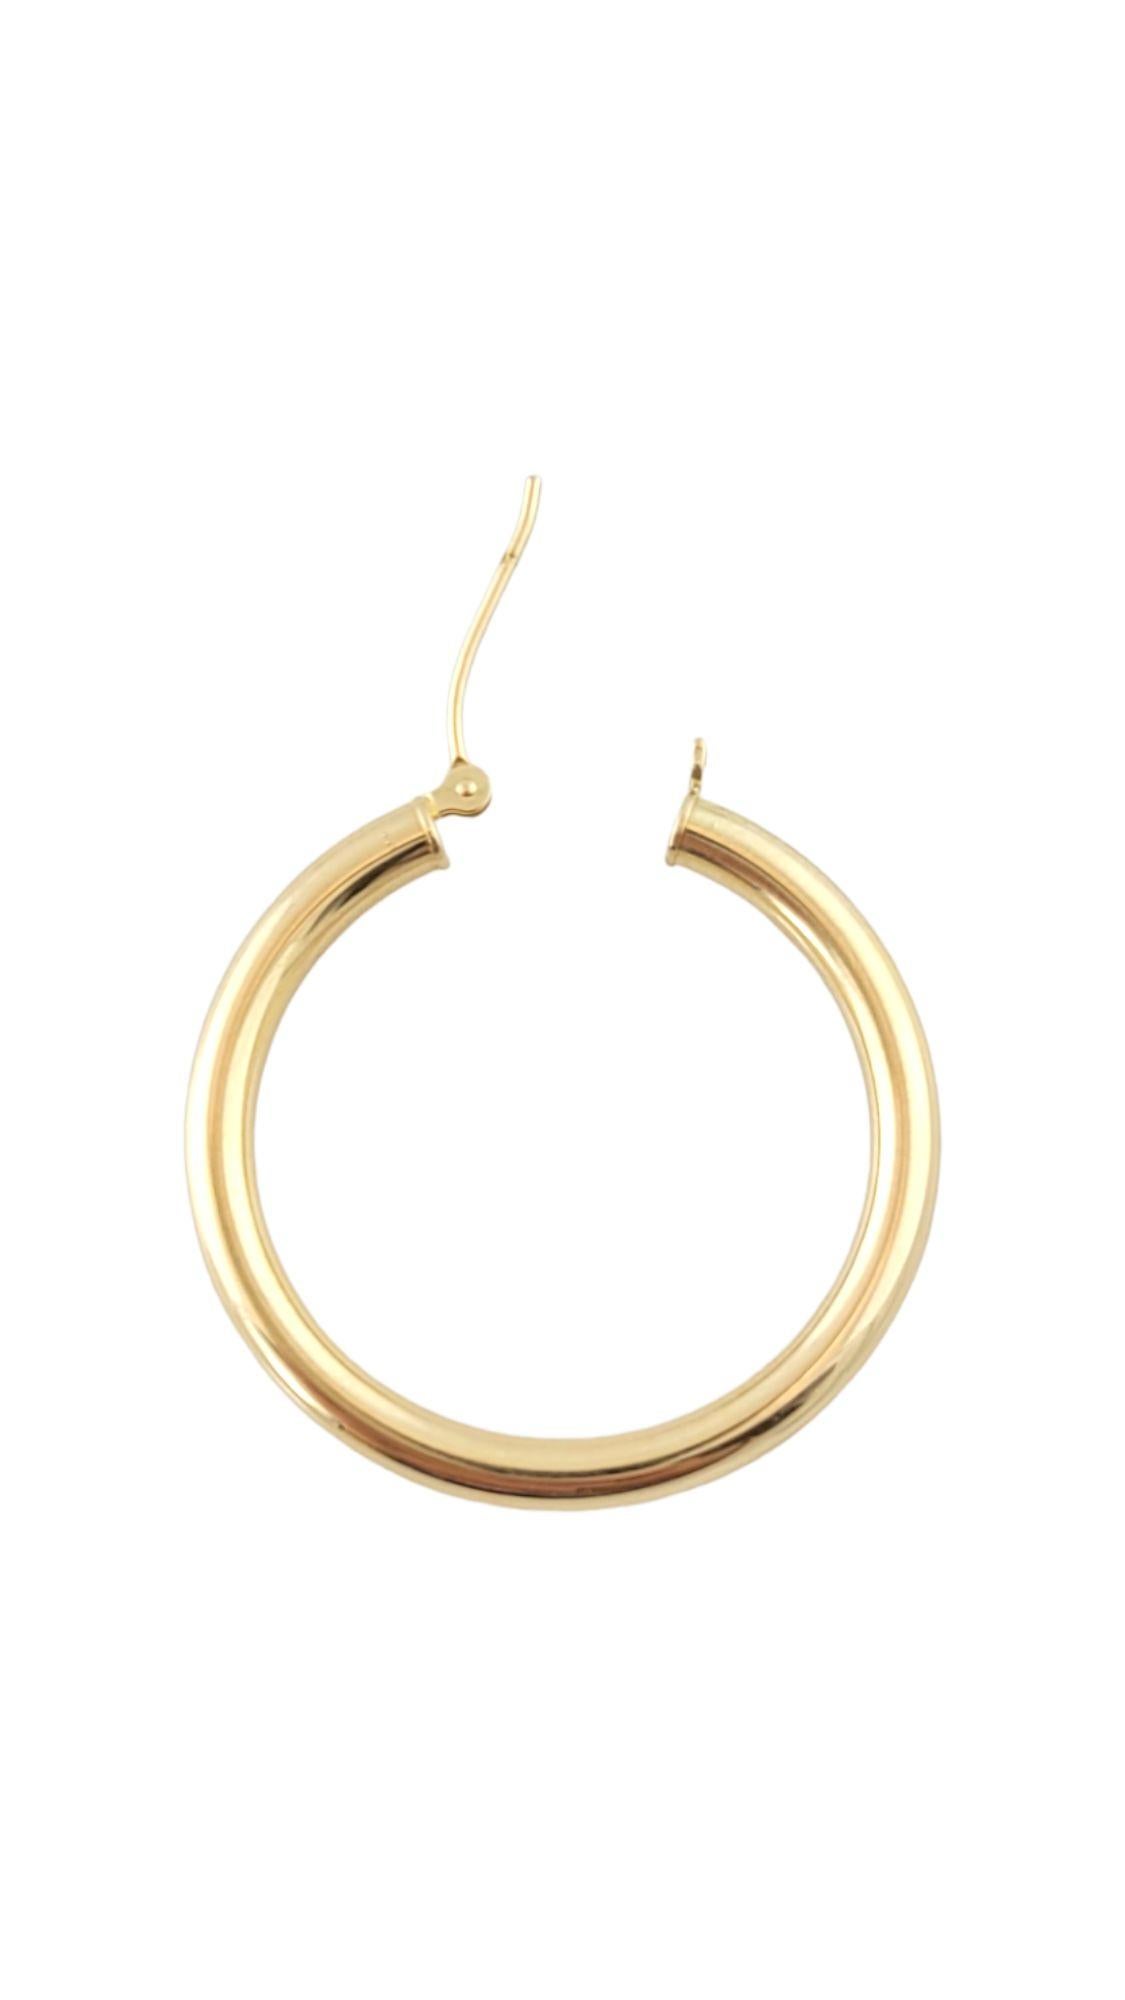  14K Yellow Gold Hoop Earrings #14557 In Good Condition For Sale In Washington Depot, CT